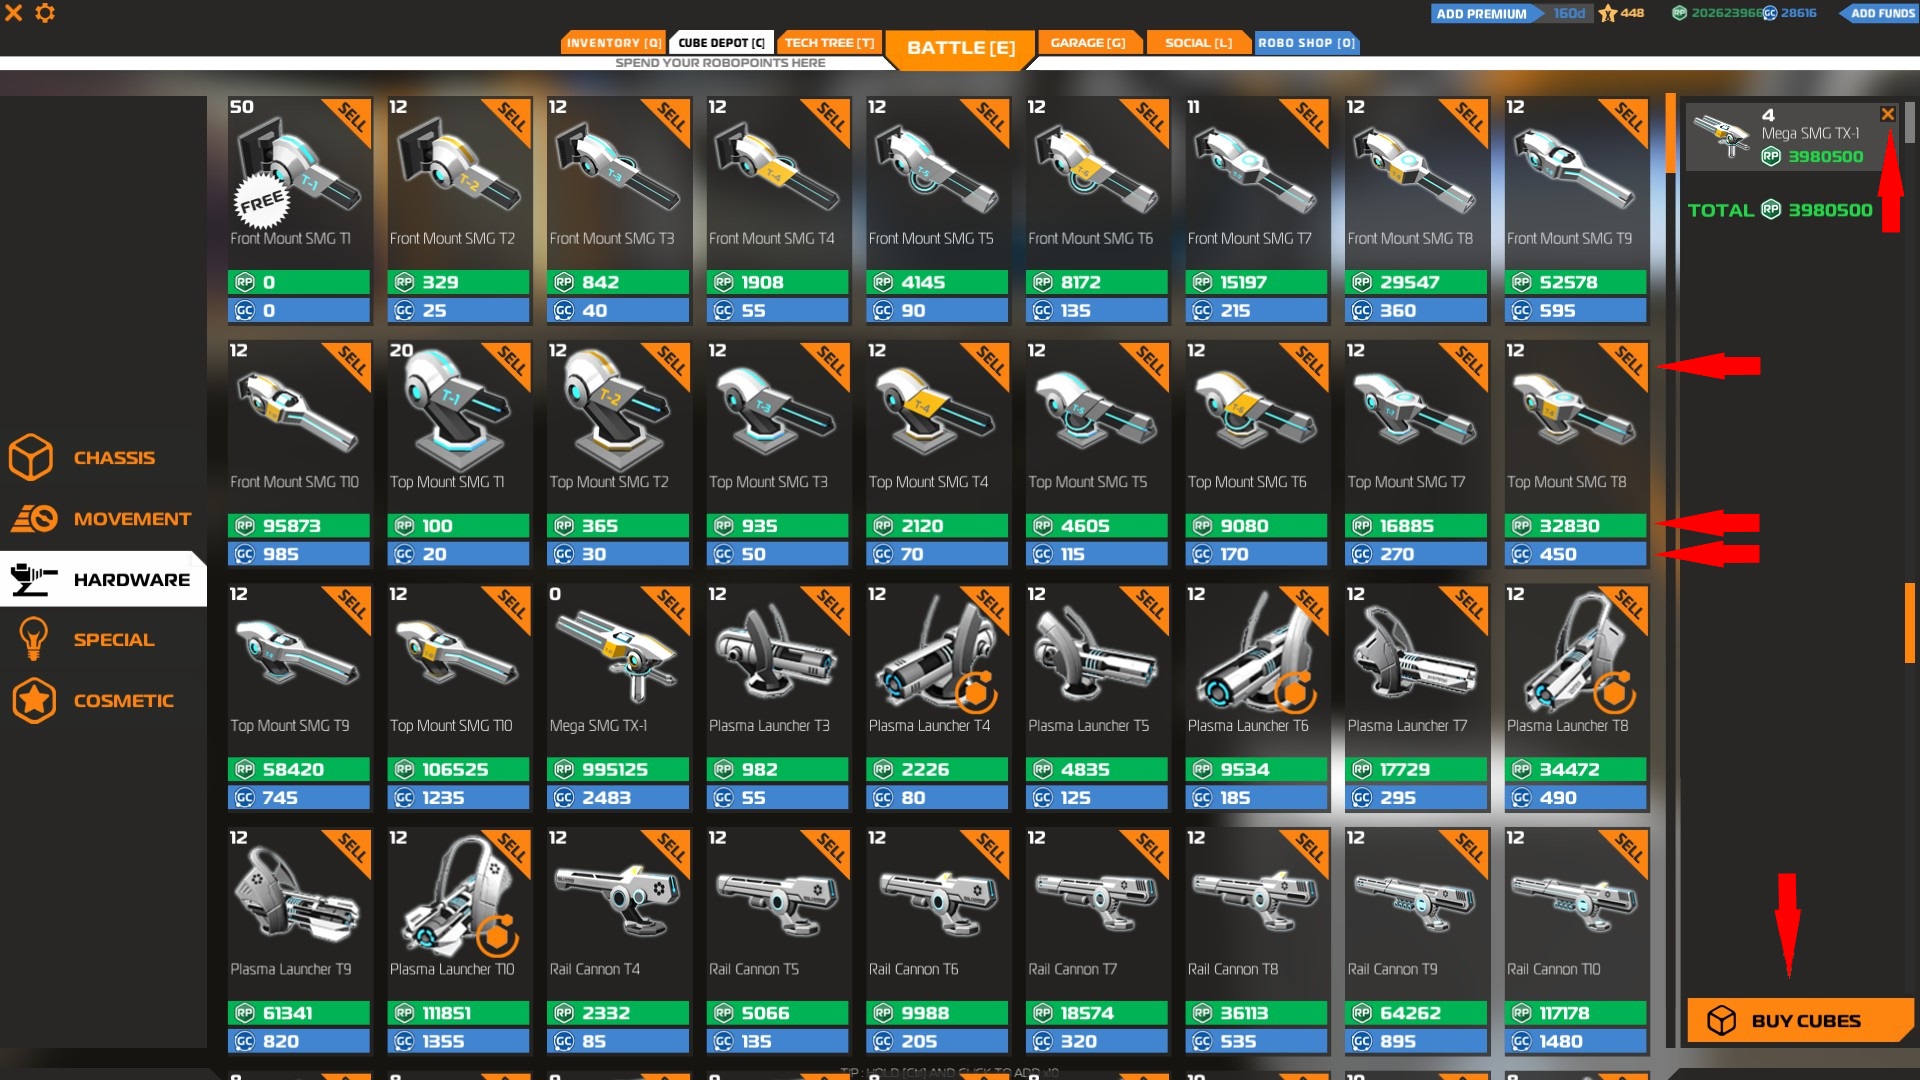 The Ultimate Robocraft Guide image 78